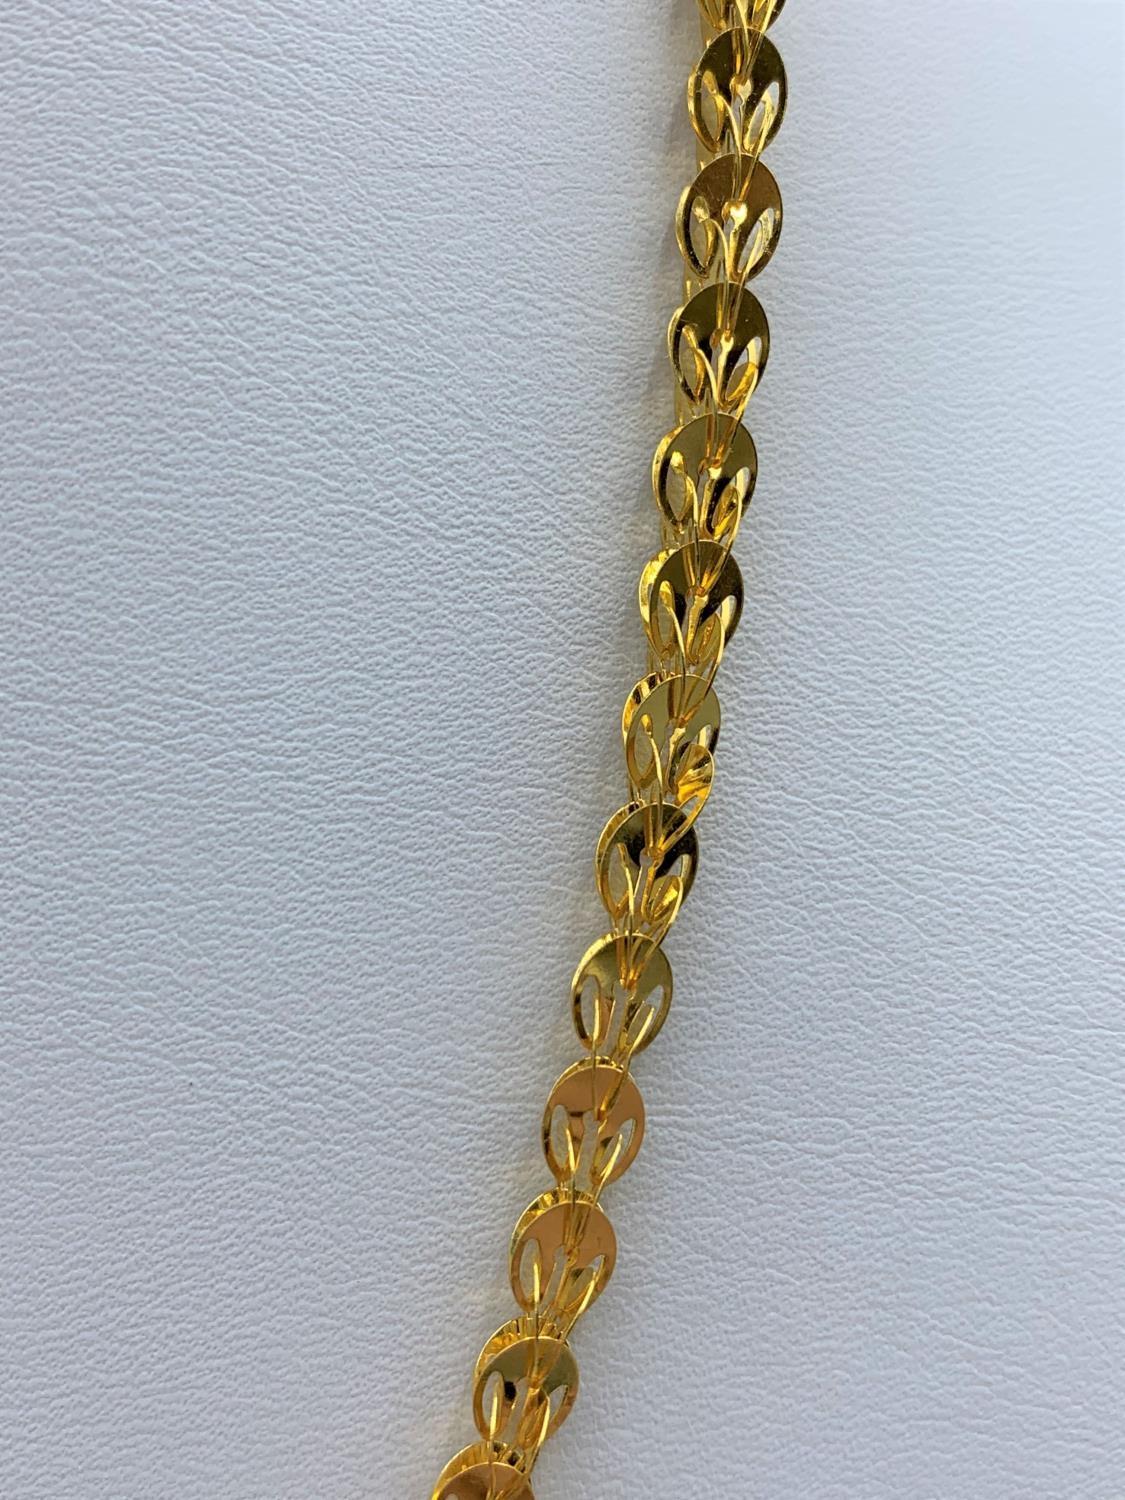 24ct Gold Necklace From The Far East Intricate Unique Design 16.4g 45cm - Image 9 of 10